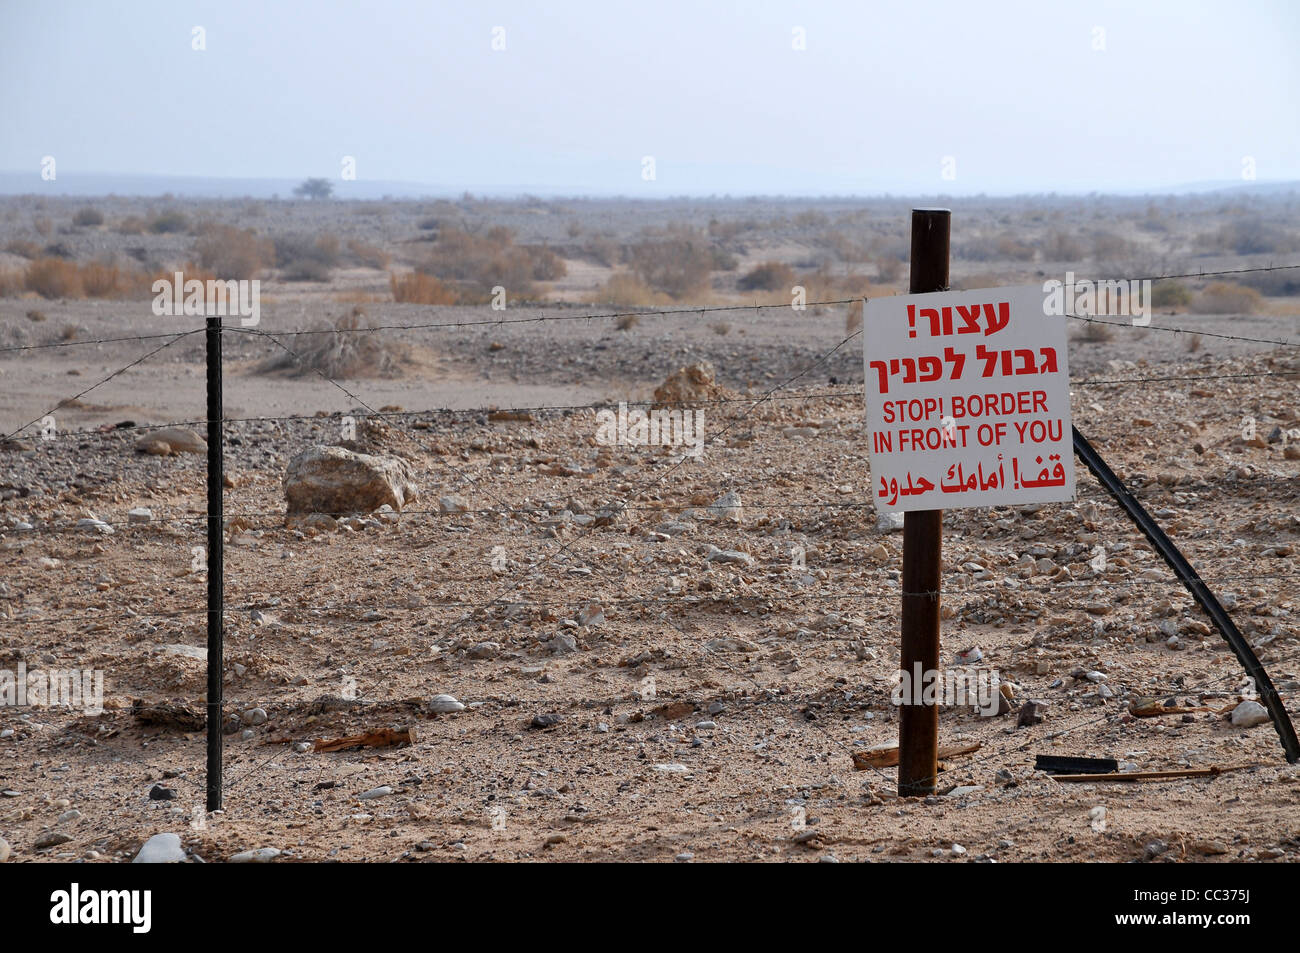 View of the fence and 'Danger Minds' marking the border between Israel and Jordan, Photo by Shay Levy Stock Photo